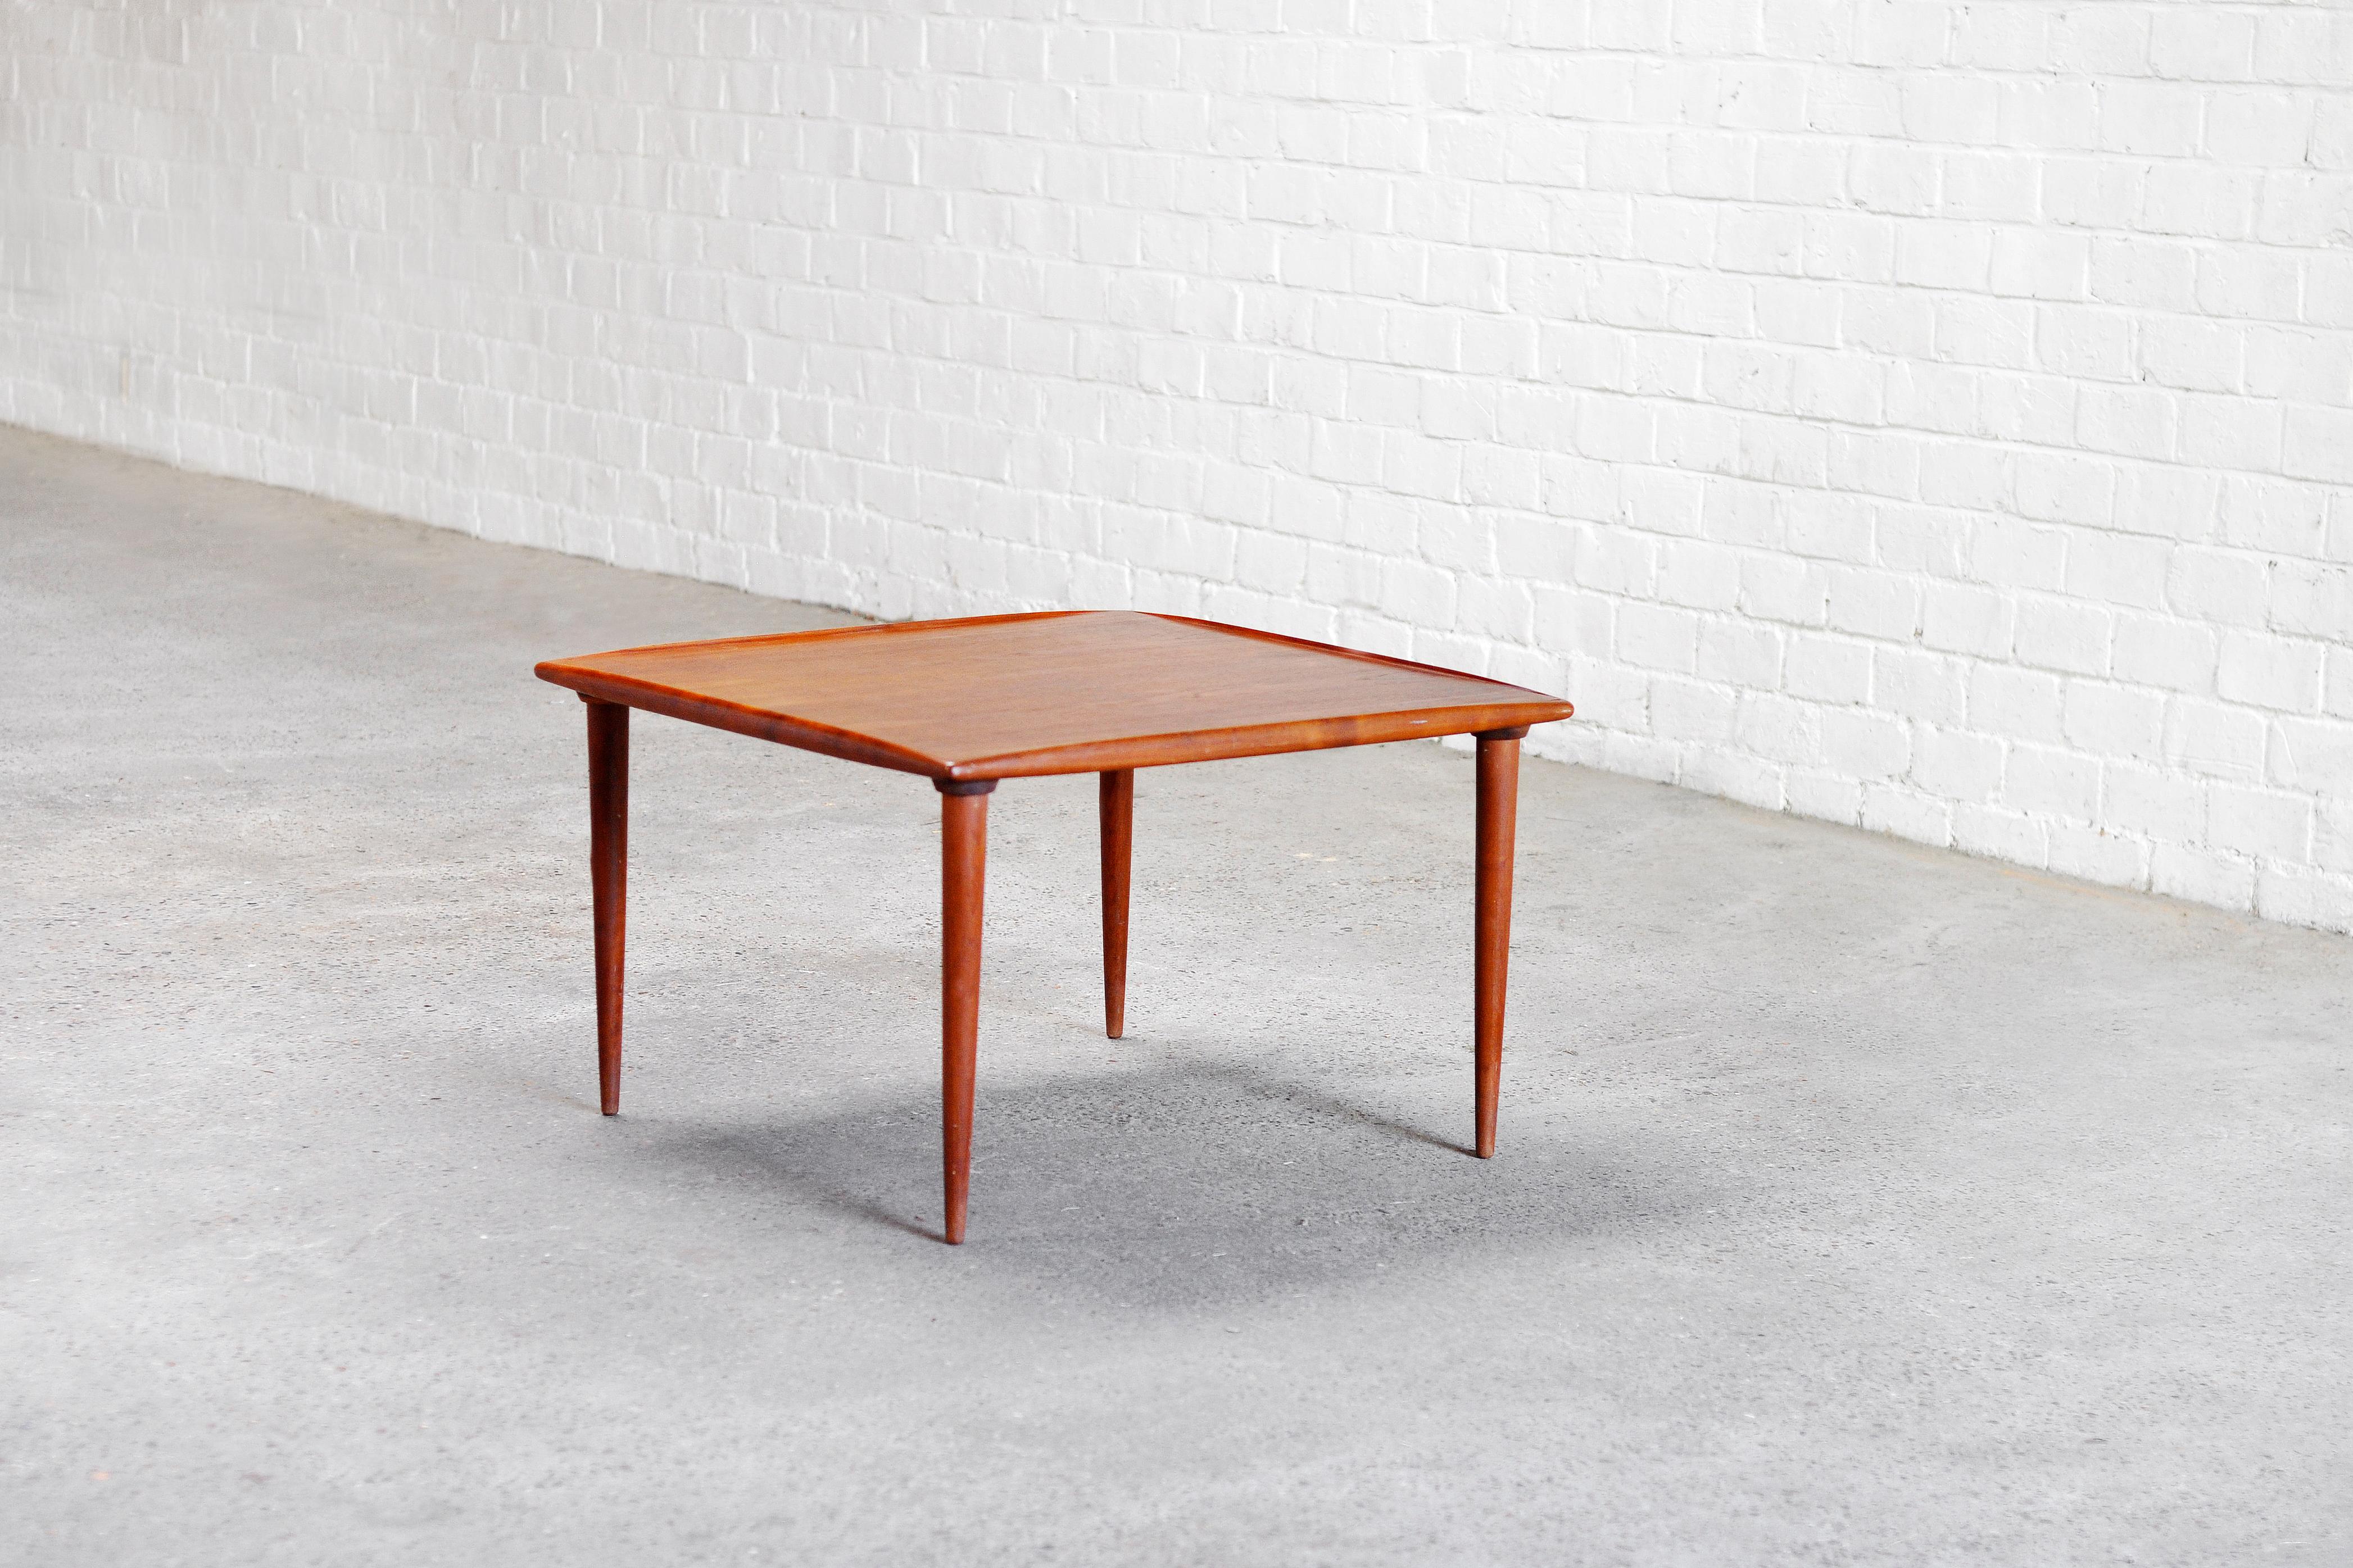 Mid century Danish modern coffee table attributed to Finh Juhl. This beautiful piece features a teak top with a curled lip edge on tapered legs. A great addition to any modern living or workspace. Wear consistent with age and use.